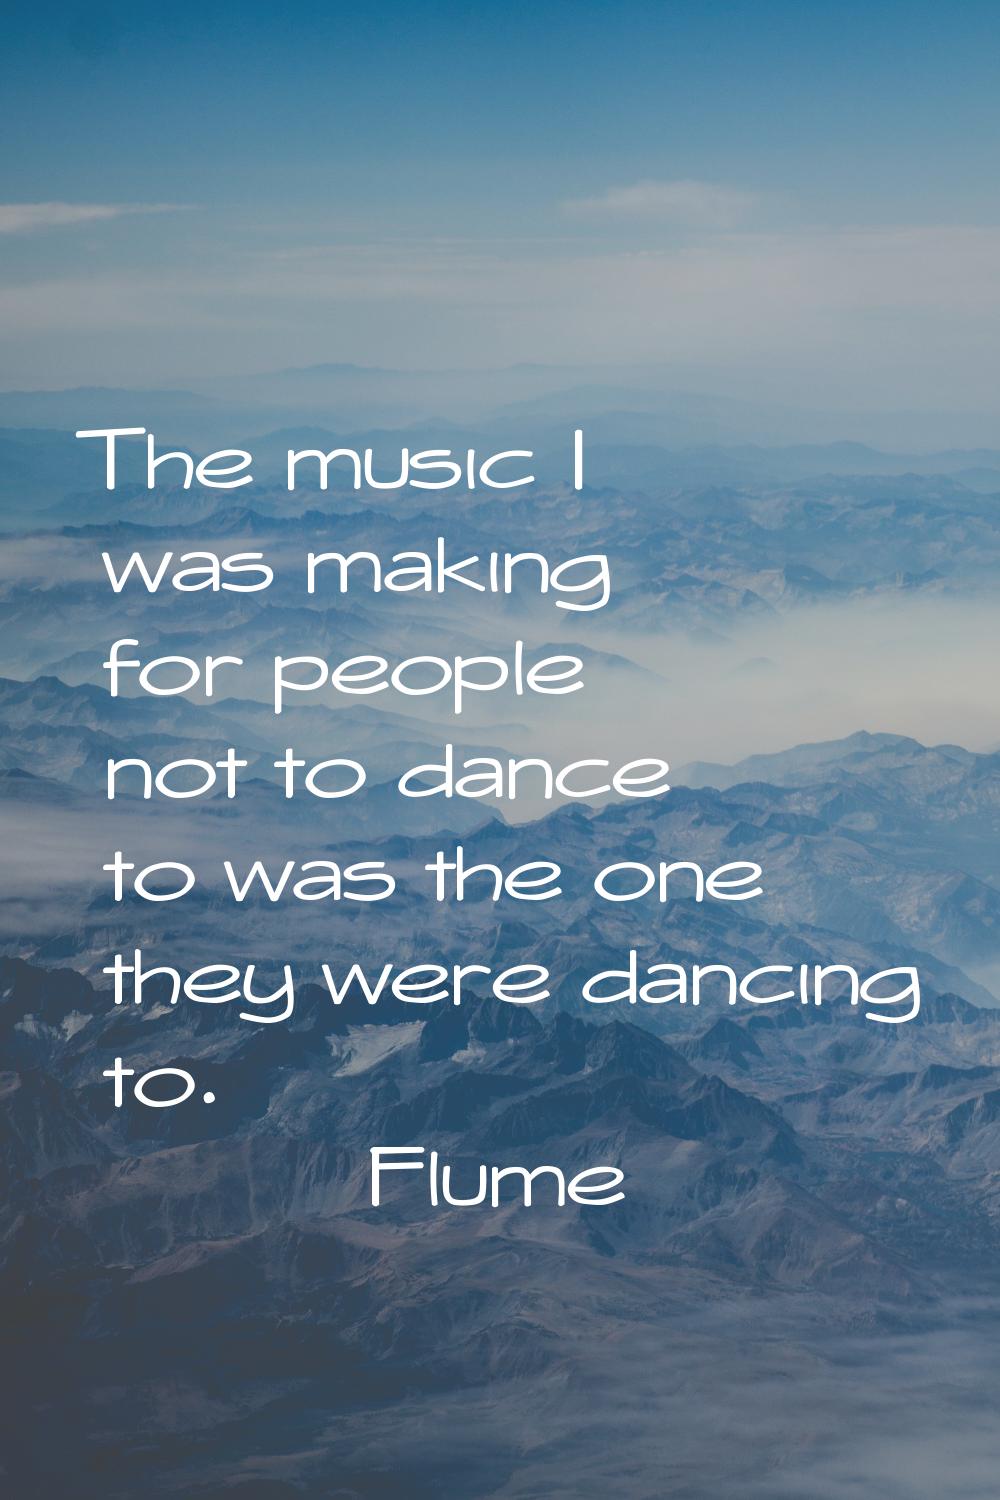 The music I was making for people not to dance to was the one they were dancing to.